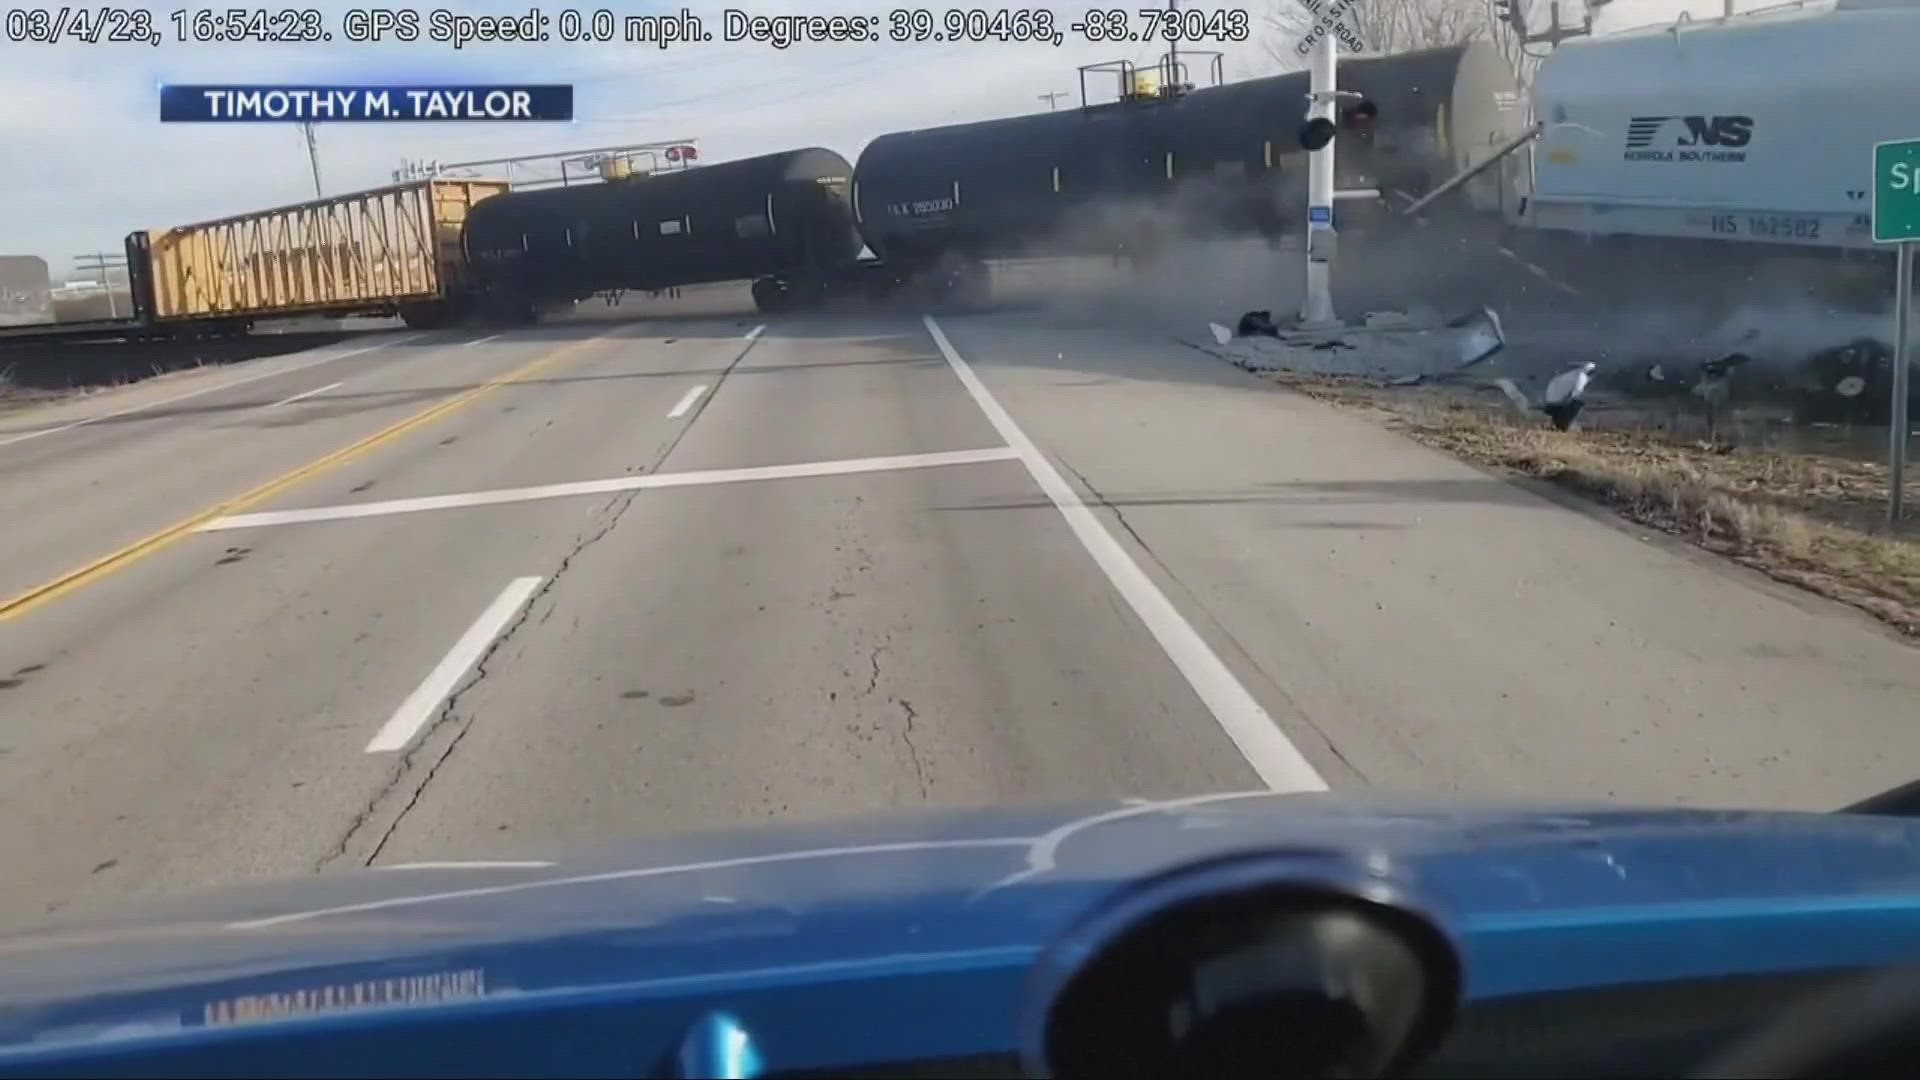 There is no sign of a spill after 20 cars of a Norfolk Southern train derailed near Springfield, officials said Sunday.